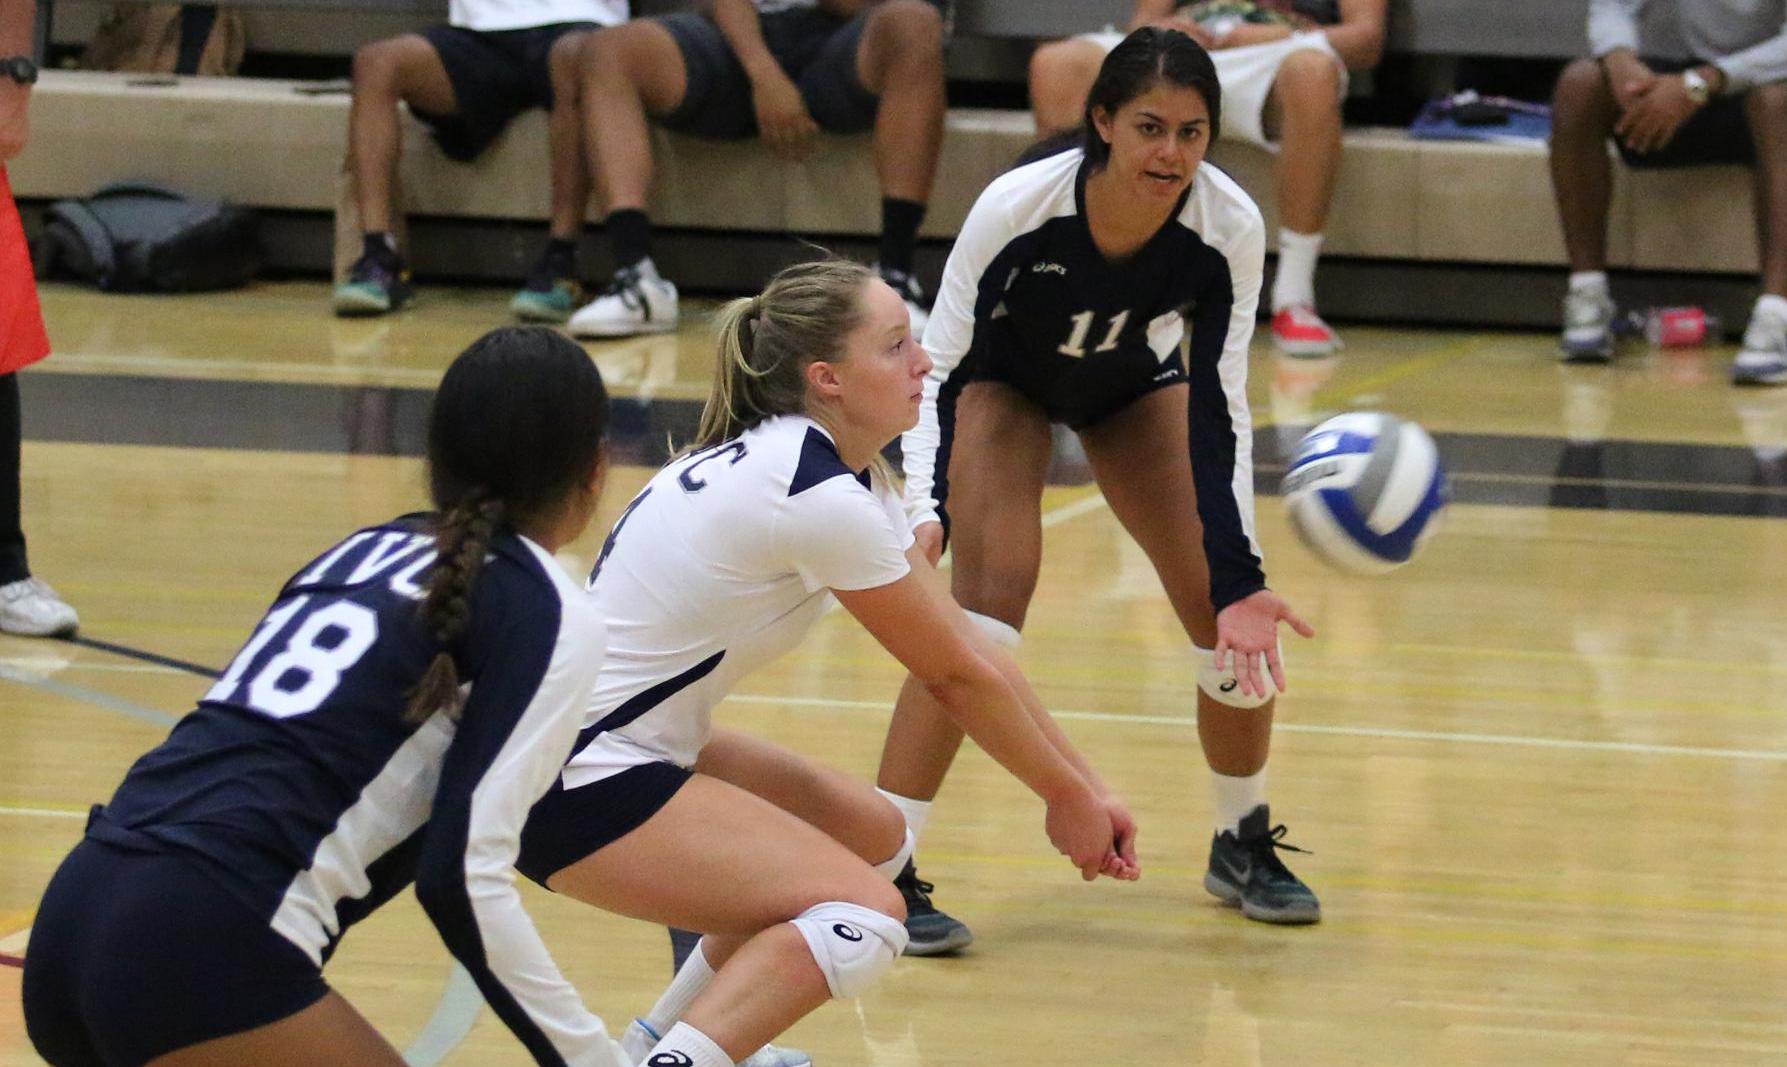 Women's volleyball team suffers first loss of the year